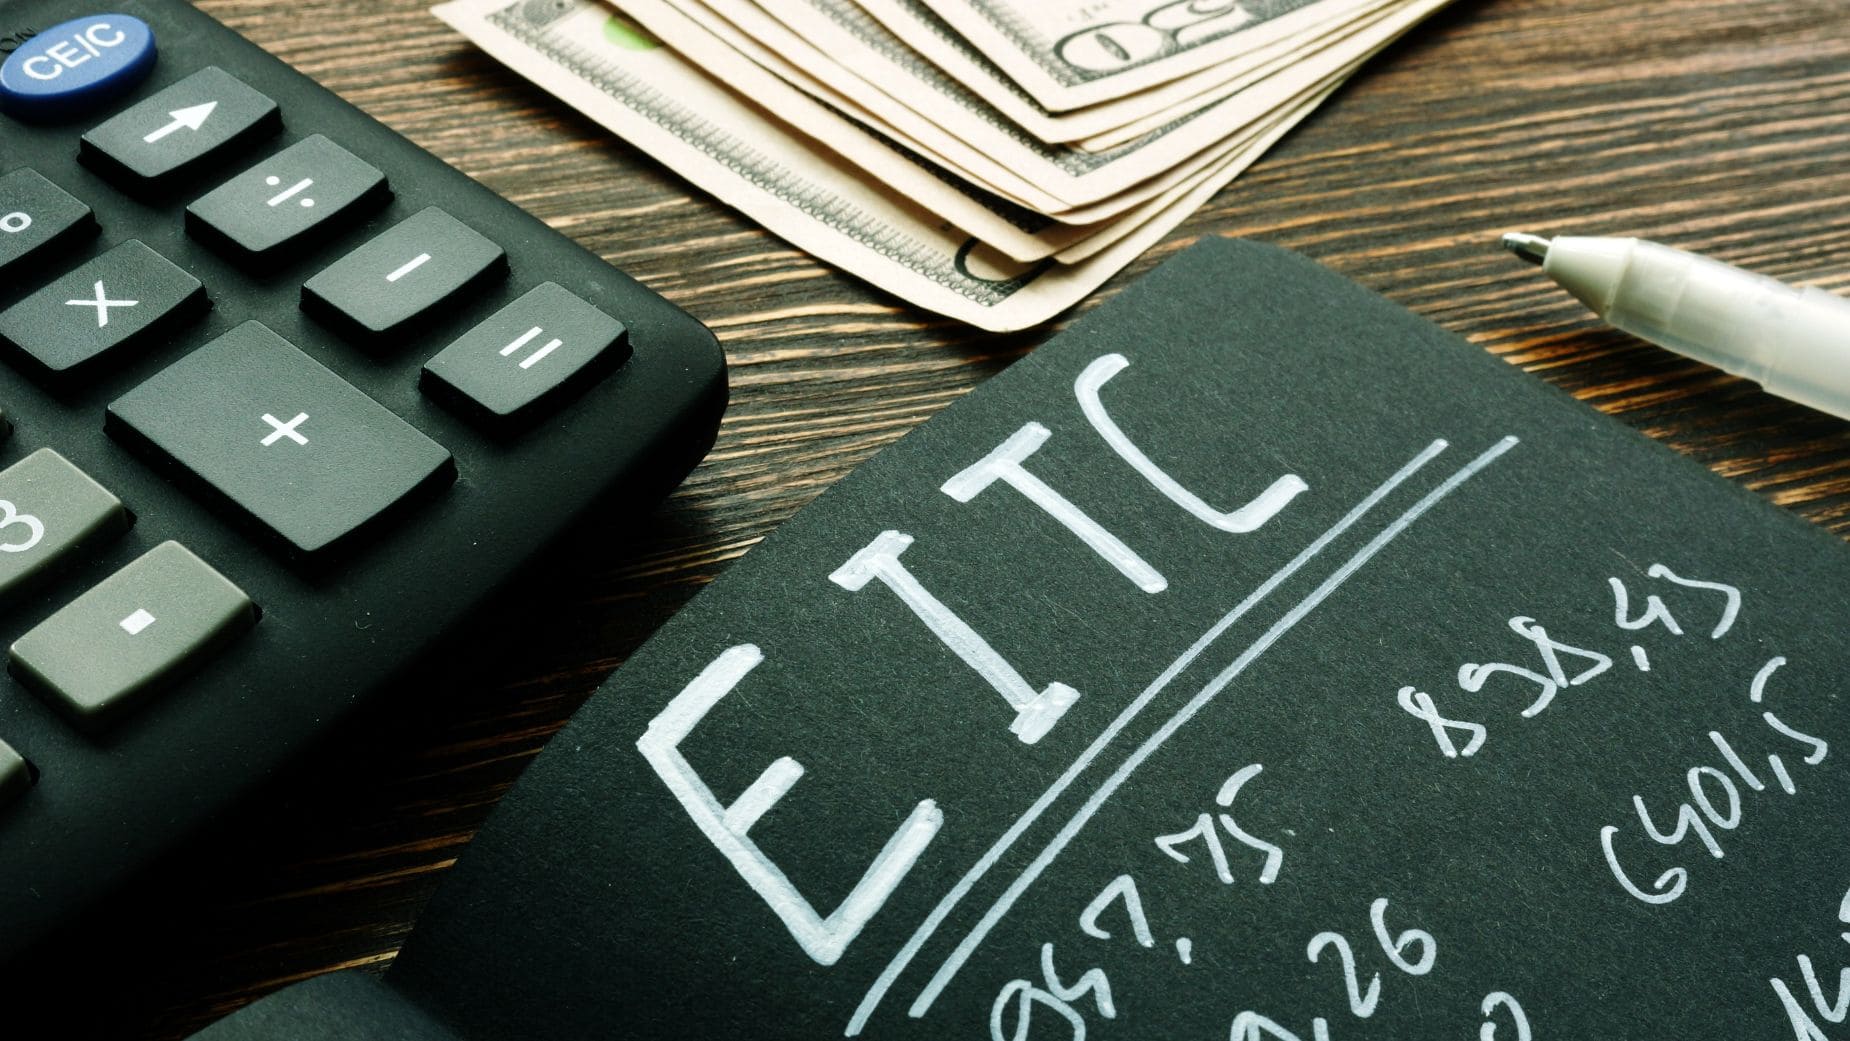 The IRS offers help about EITC